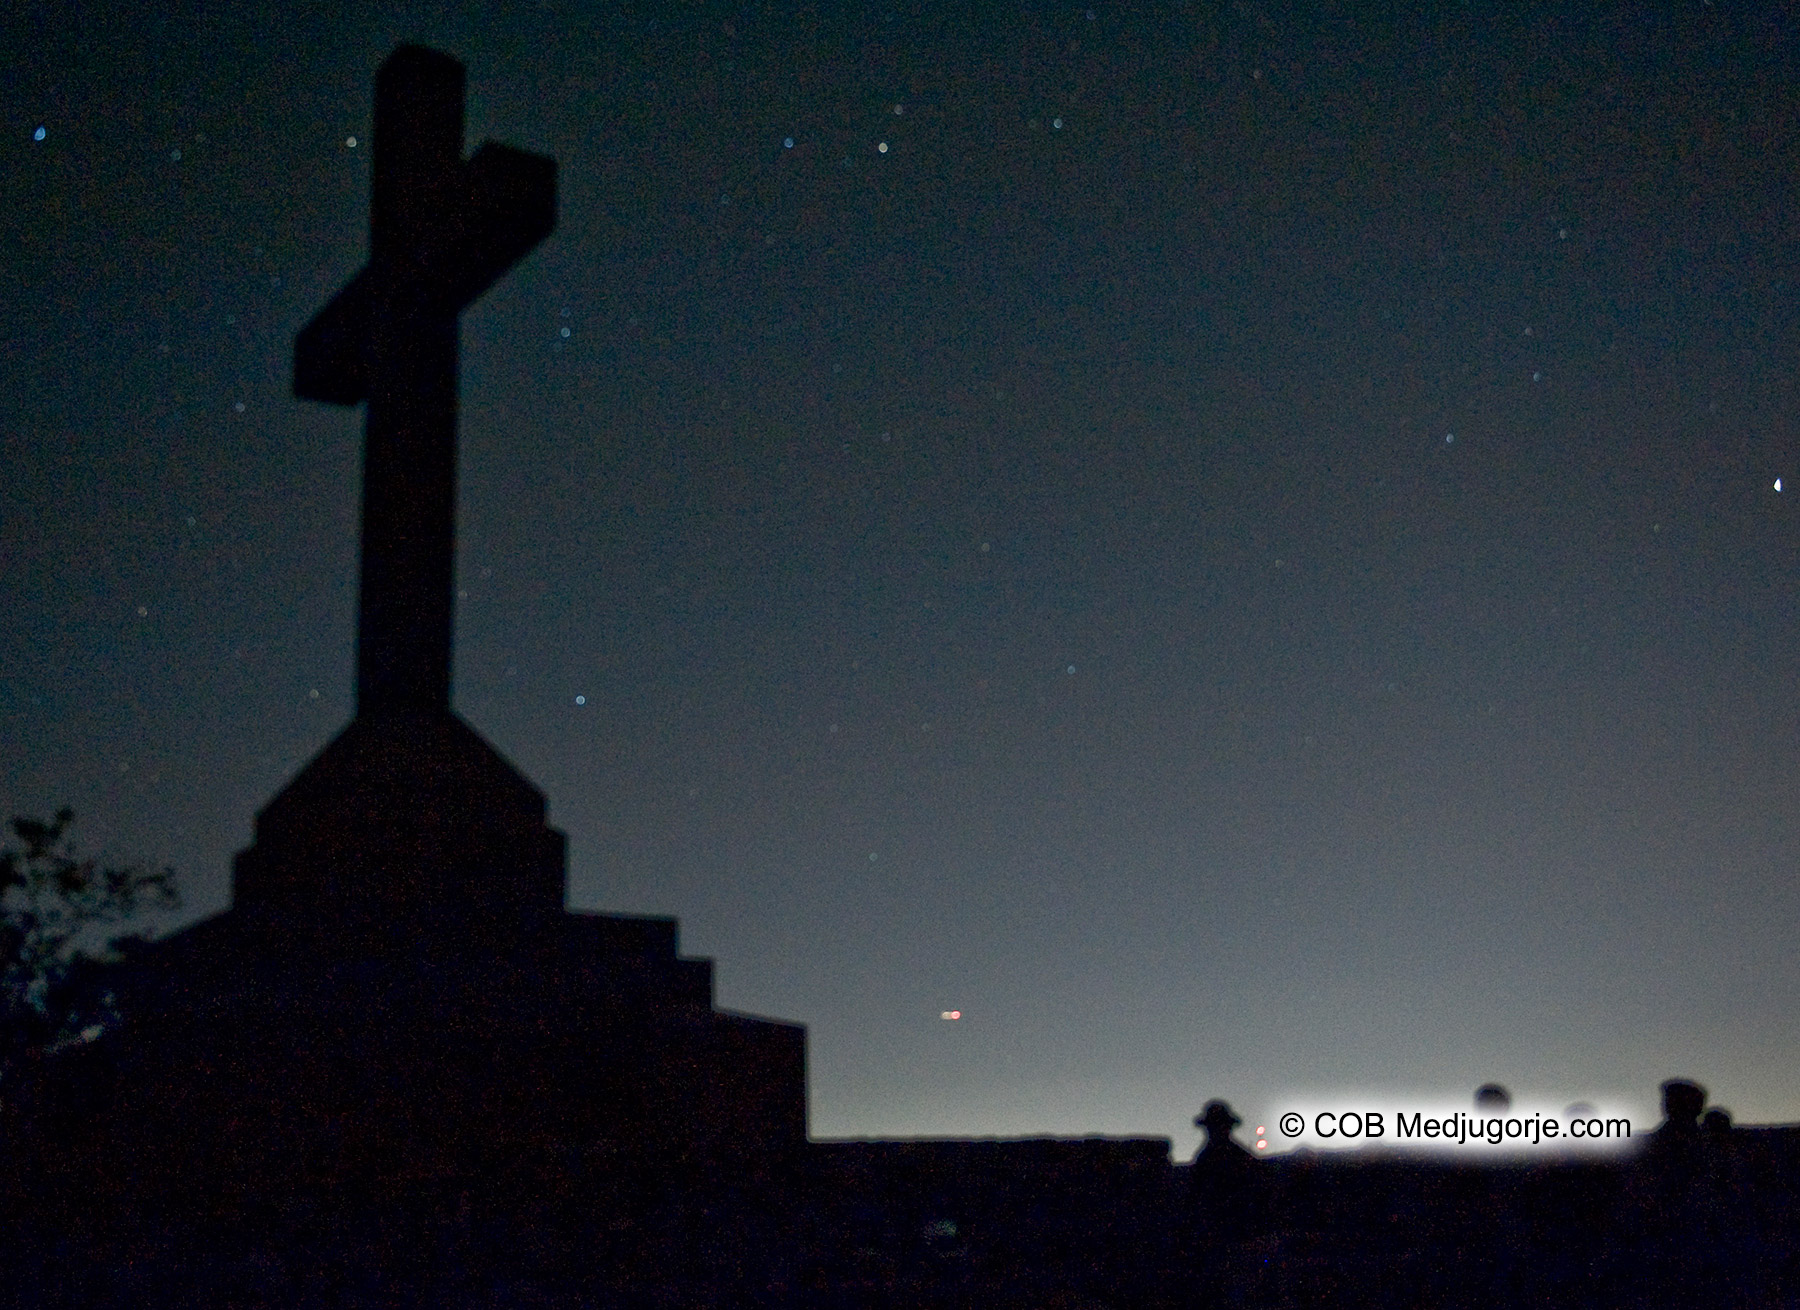 Caritas Community and the Cross at Night